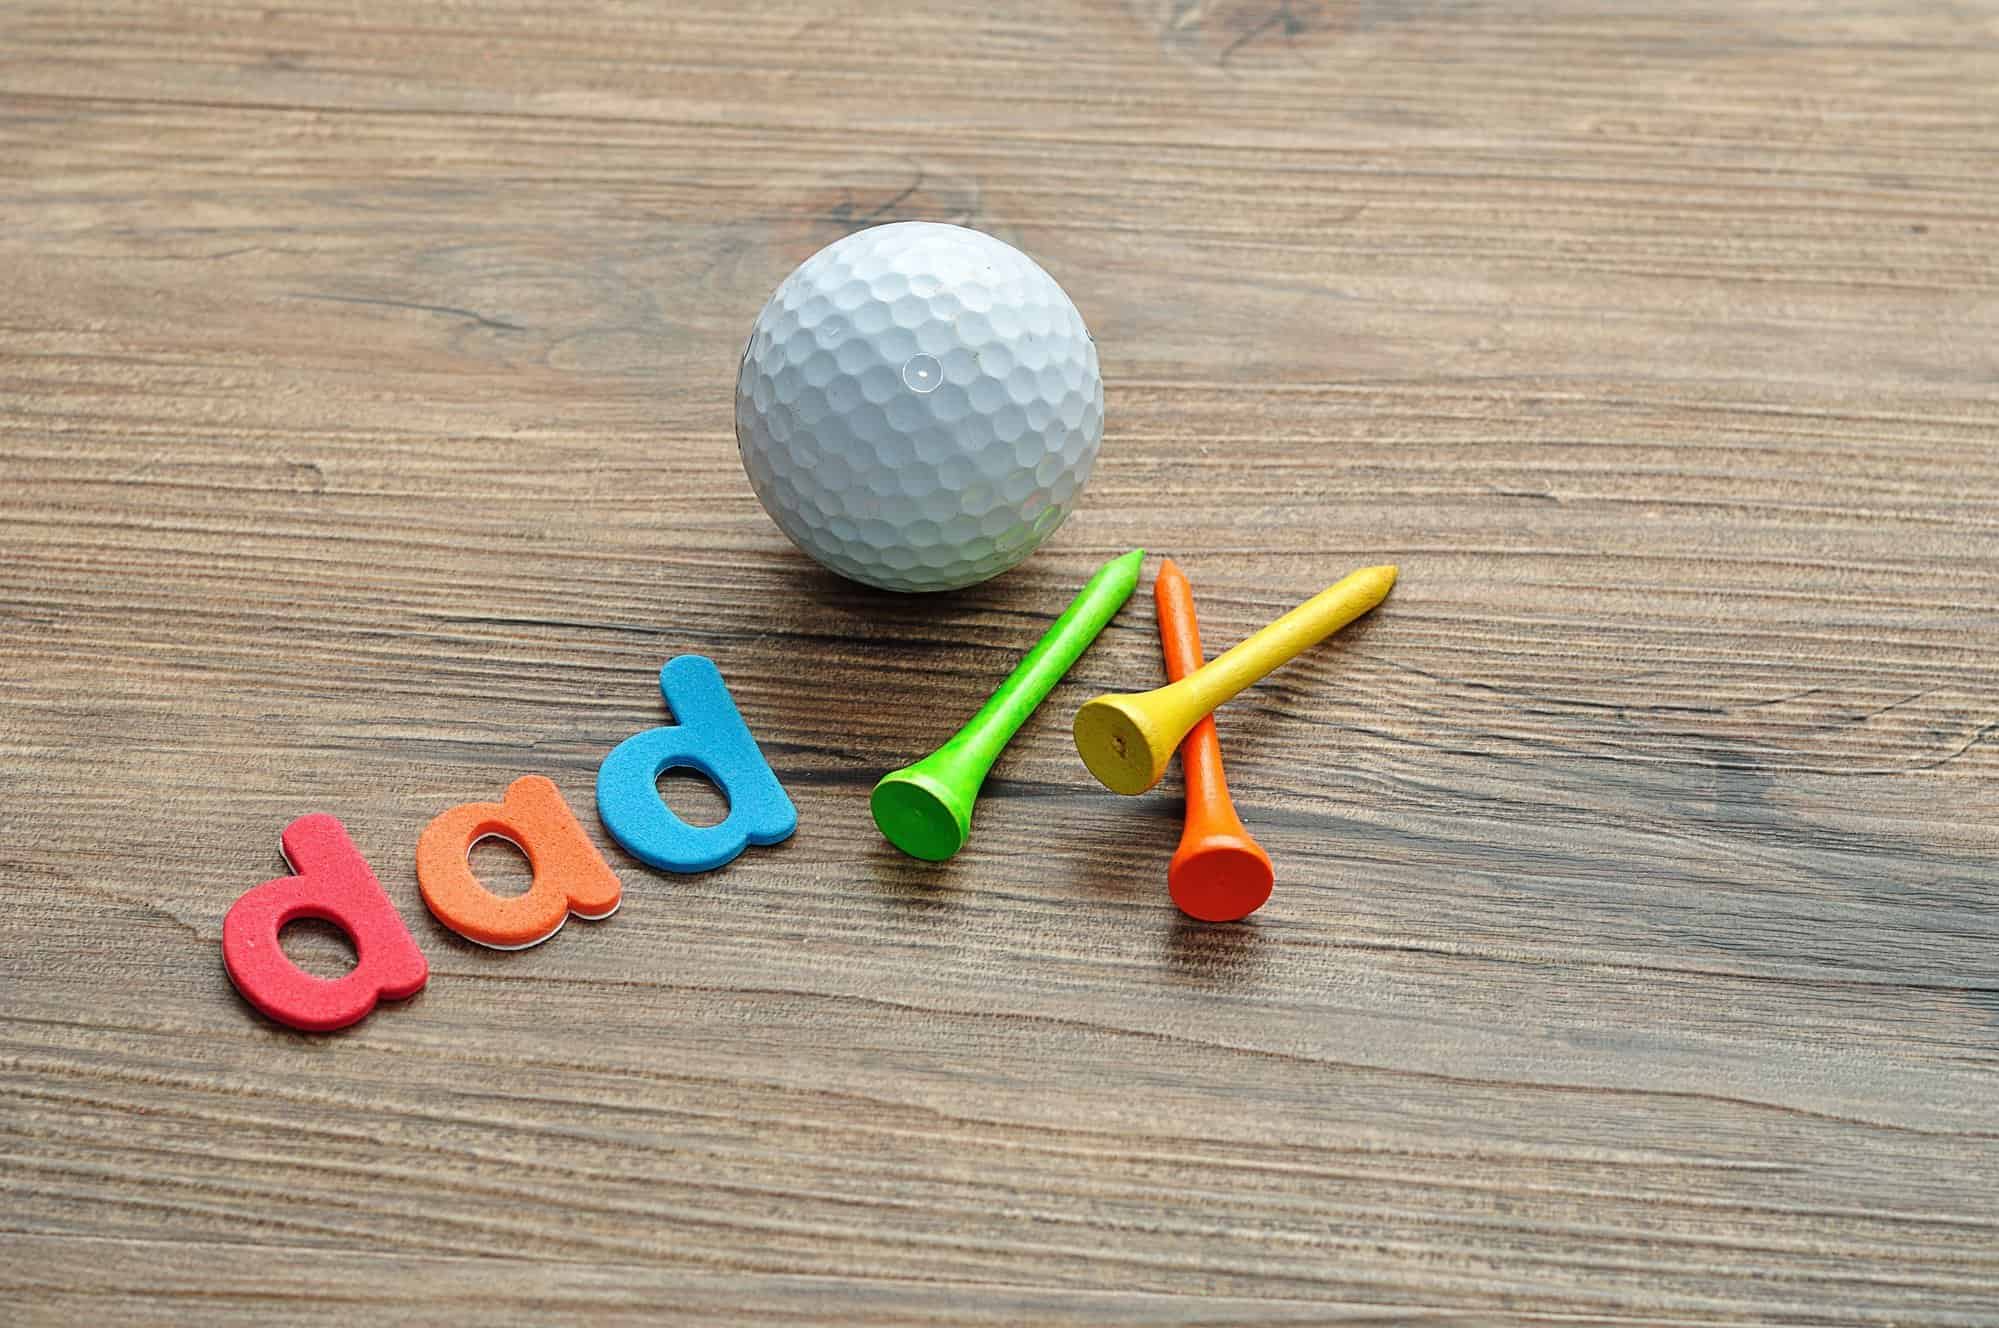 Best Golf Gift Ideas For Dad Under $30 - Golf Gifts For Him